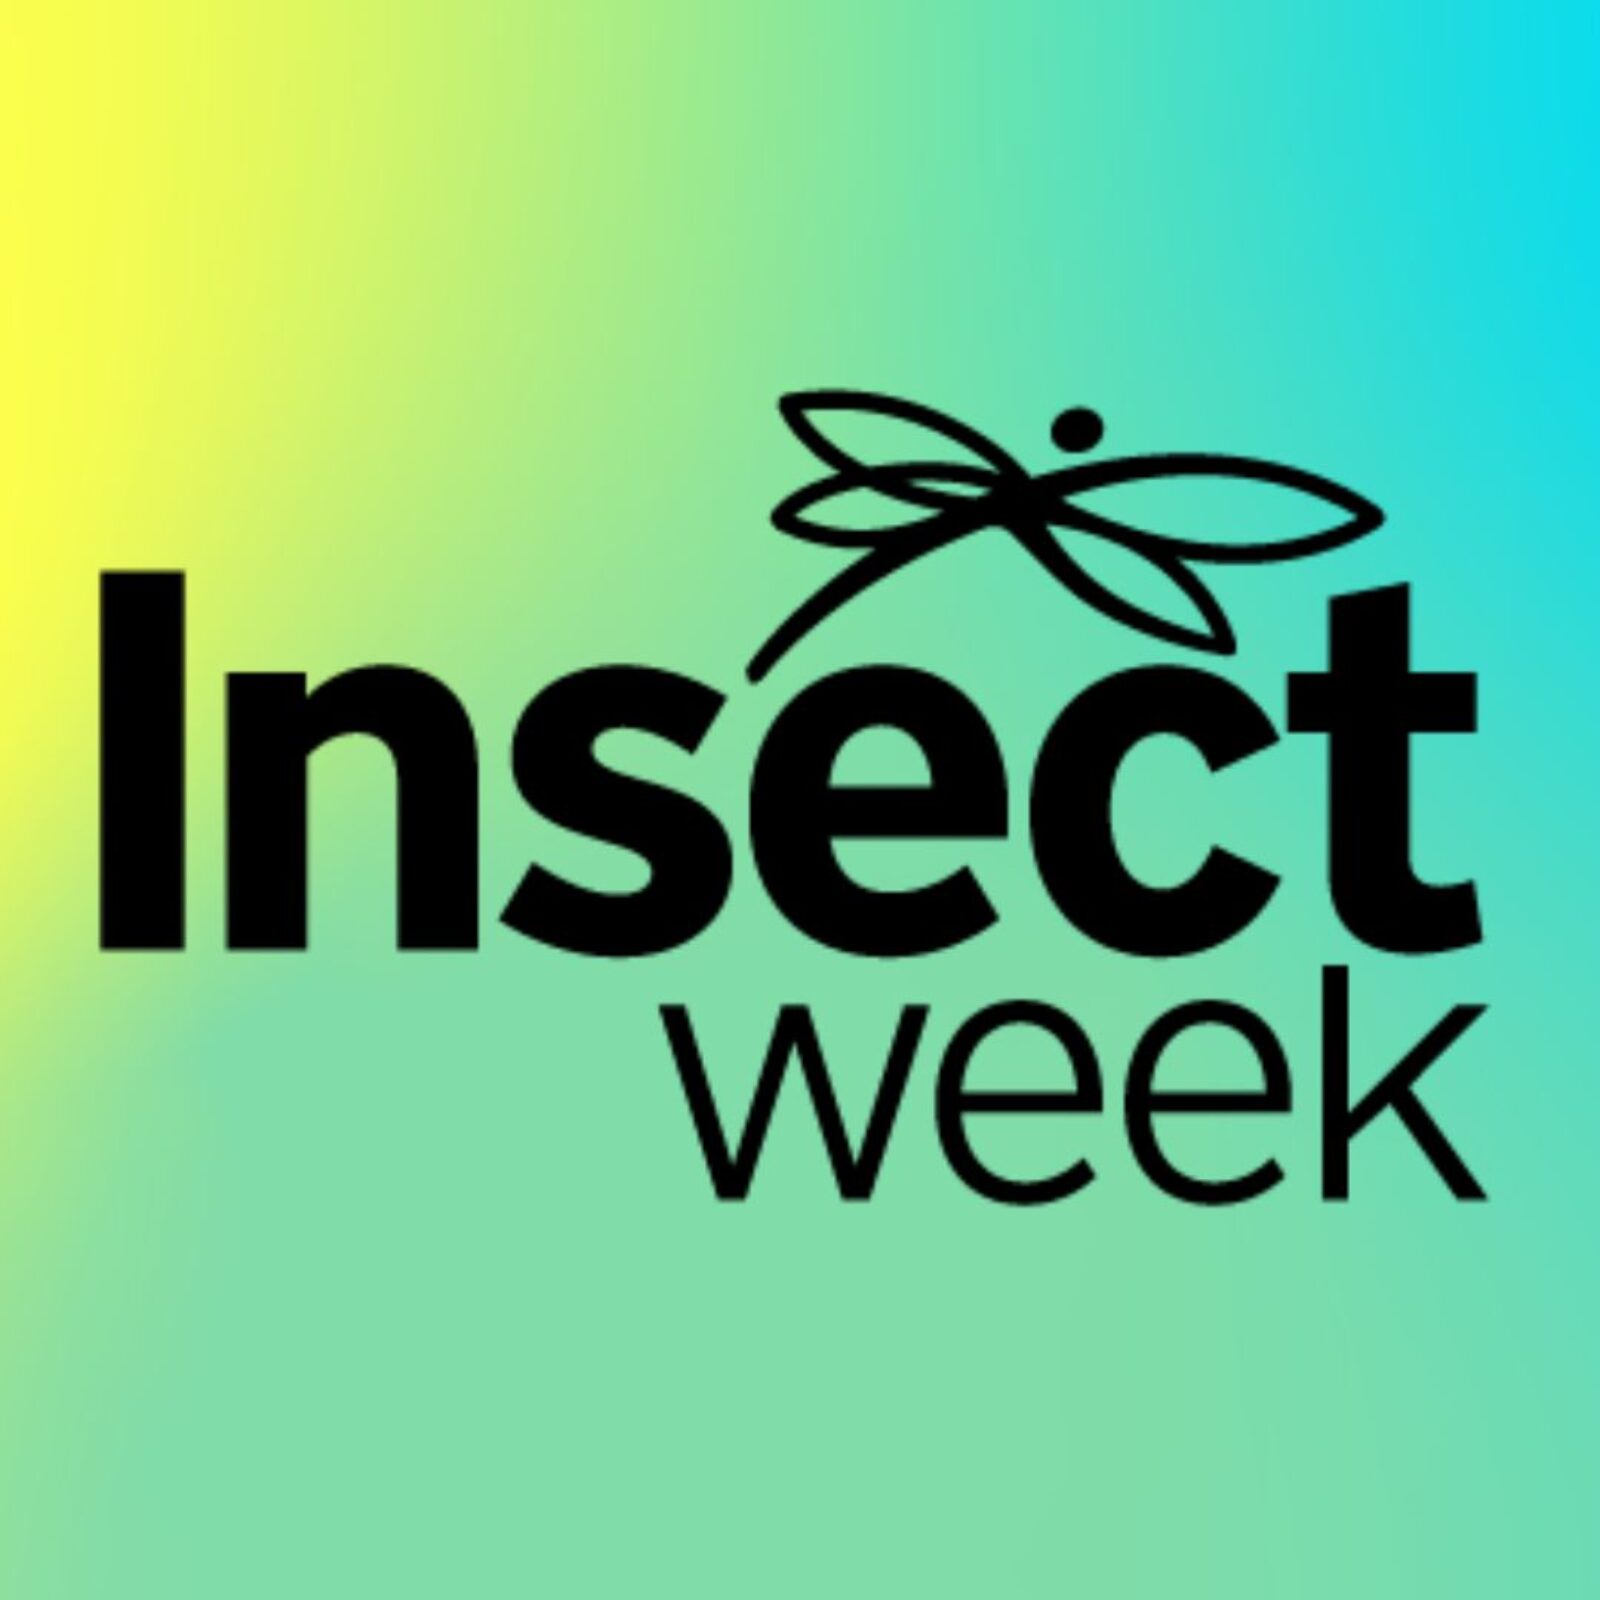 Insect Week logo on gradient background yellow green blue